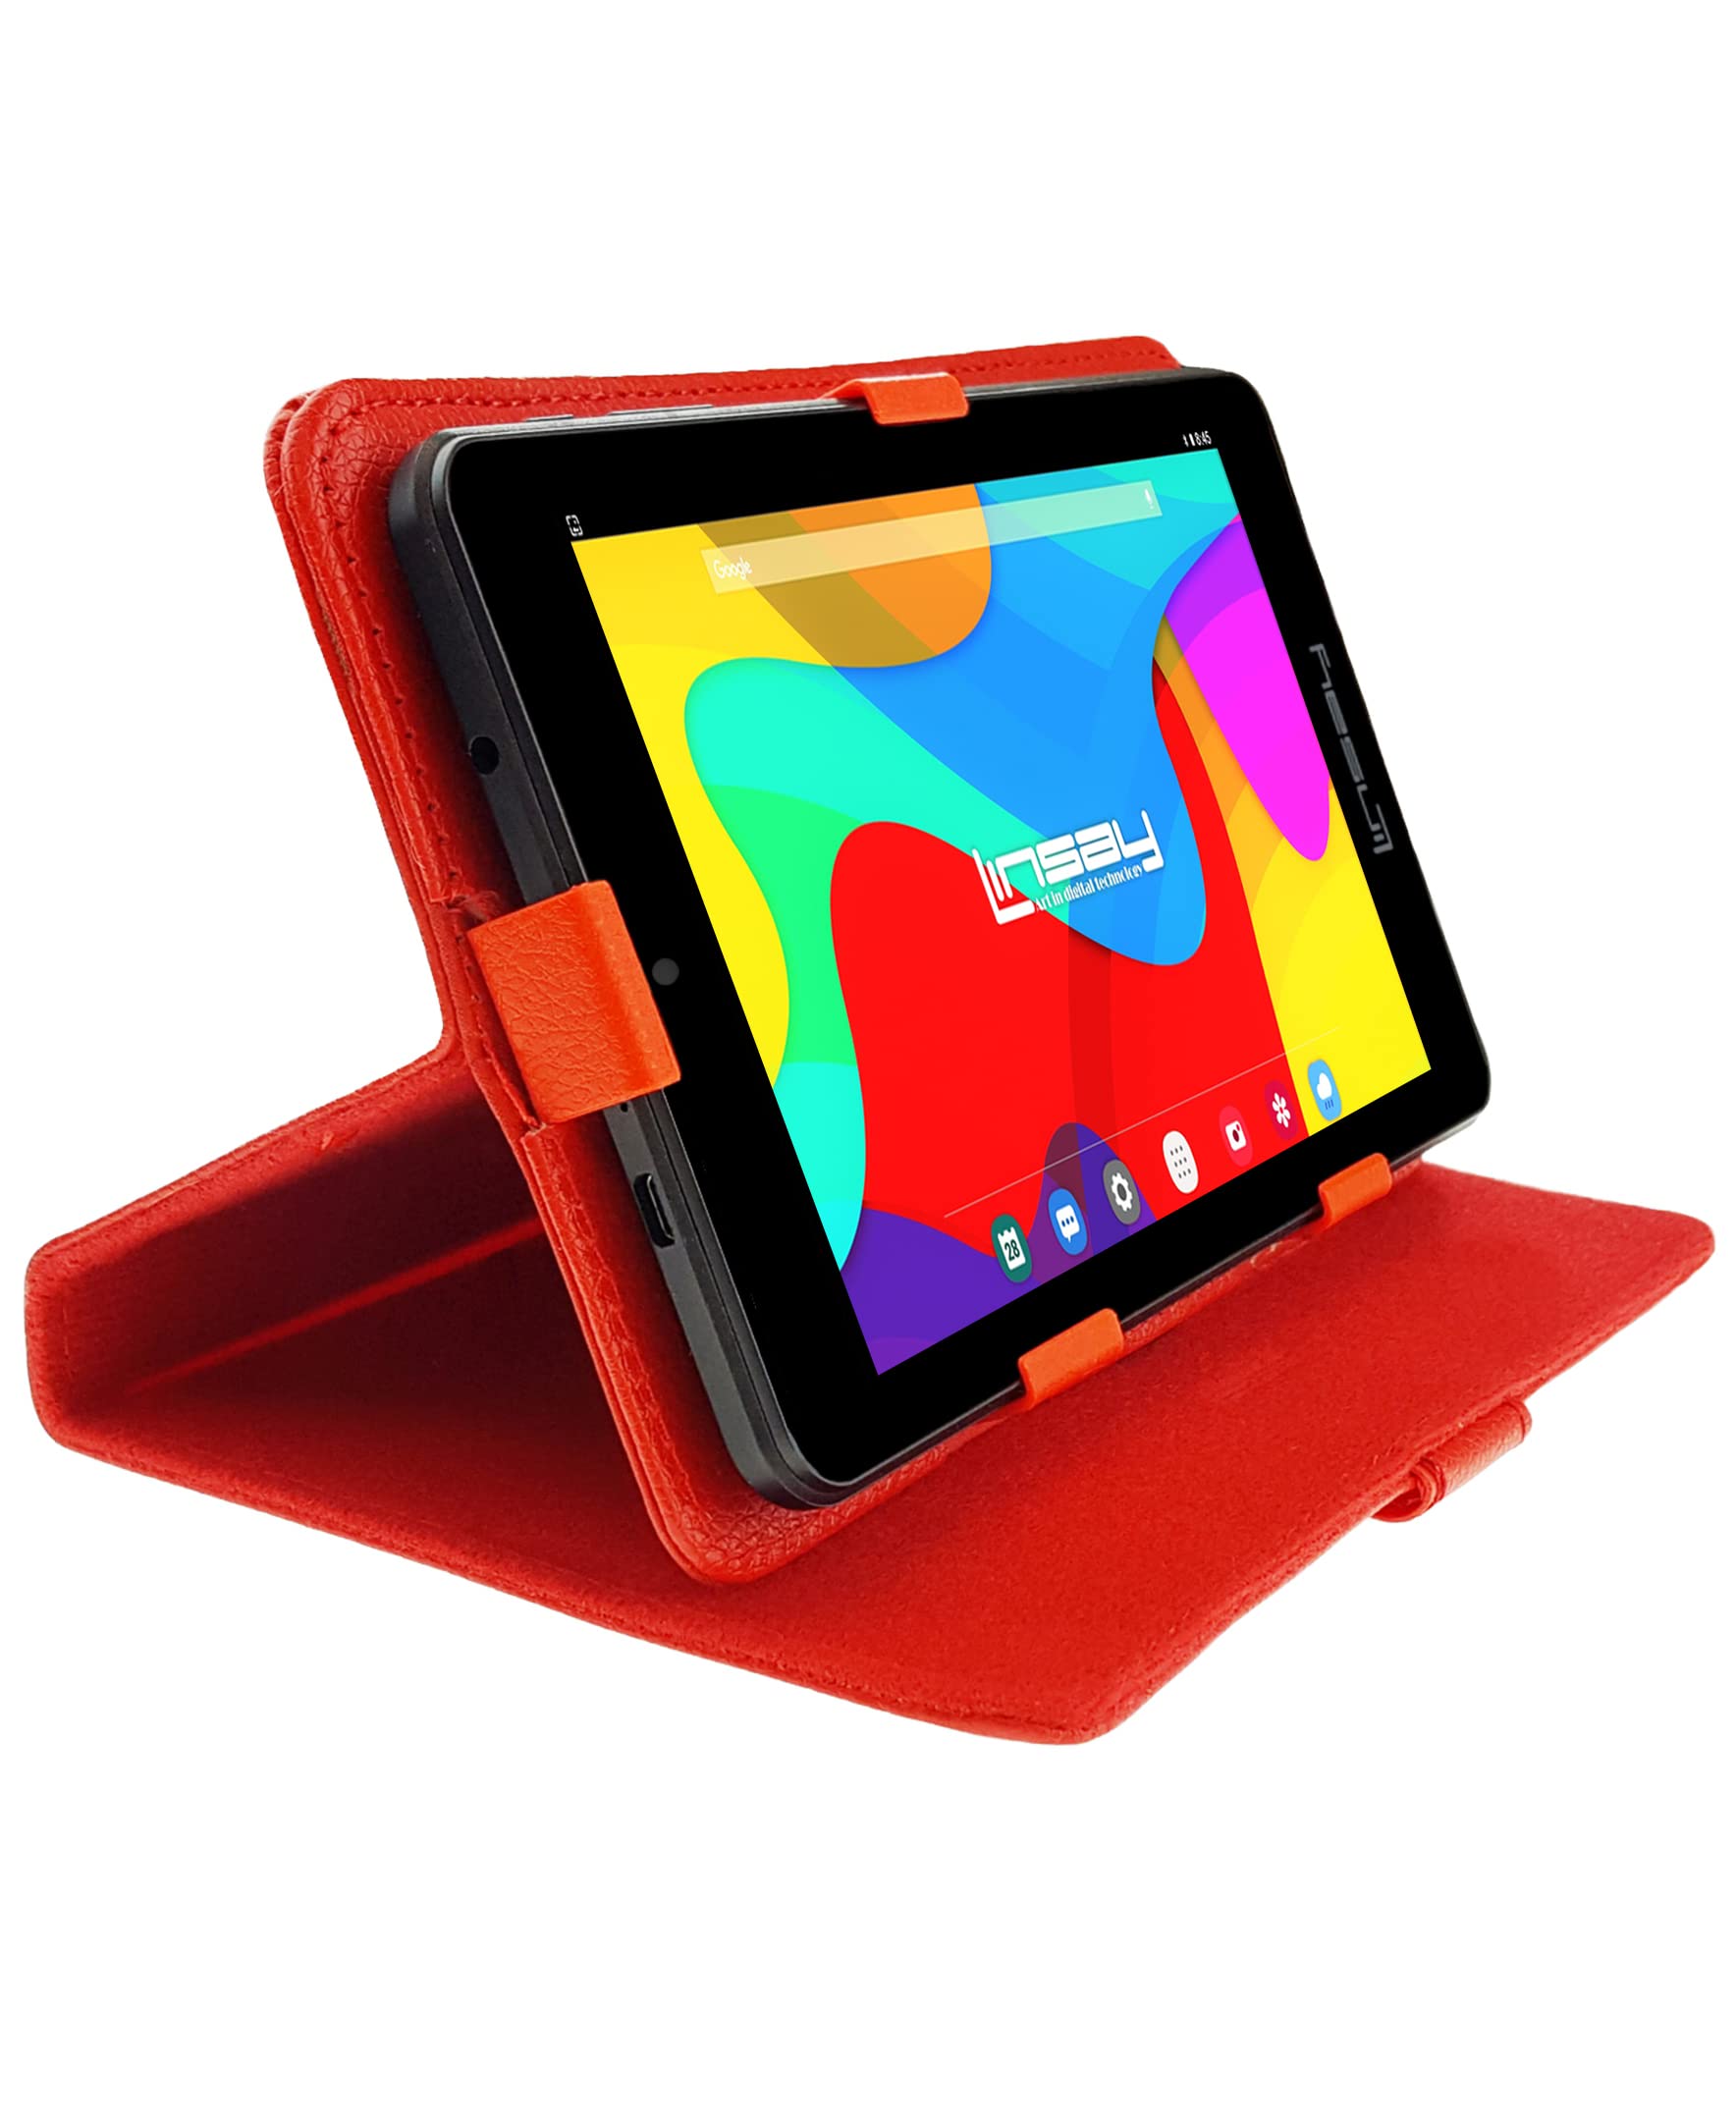 LINSAY 7" 2GB RAM 32GB Storage Android 12 Tablet with Red Leather Case, Pop Holder and Pen Stylus